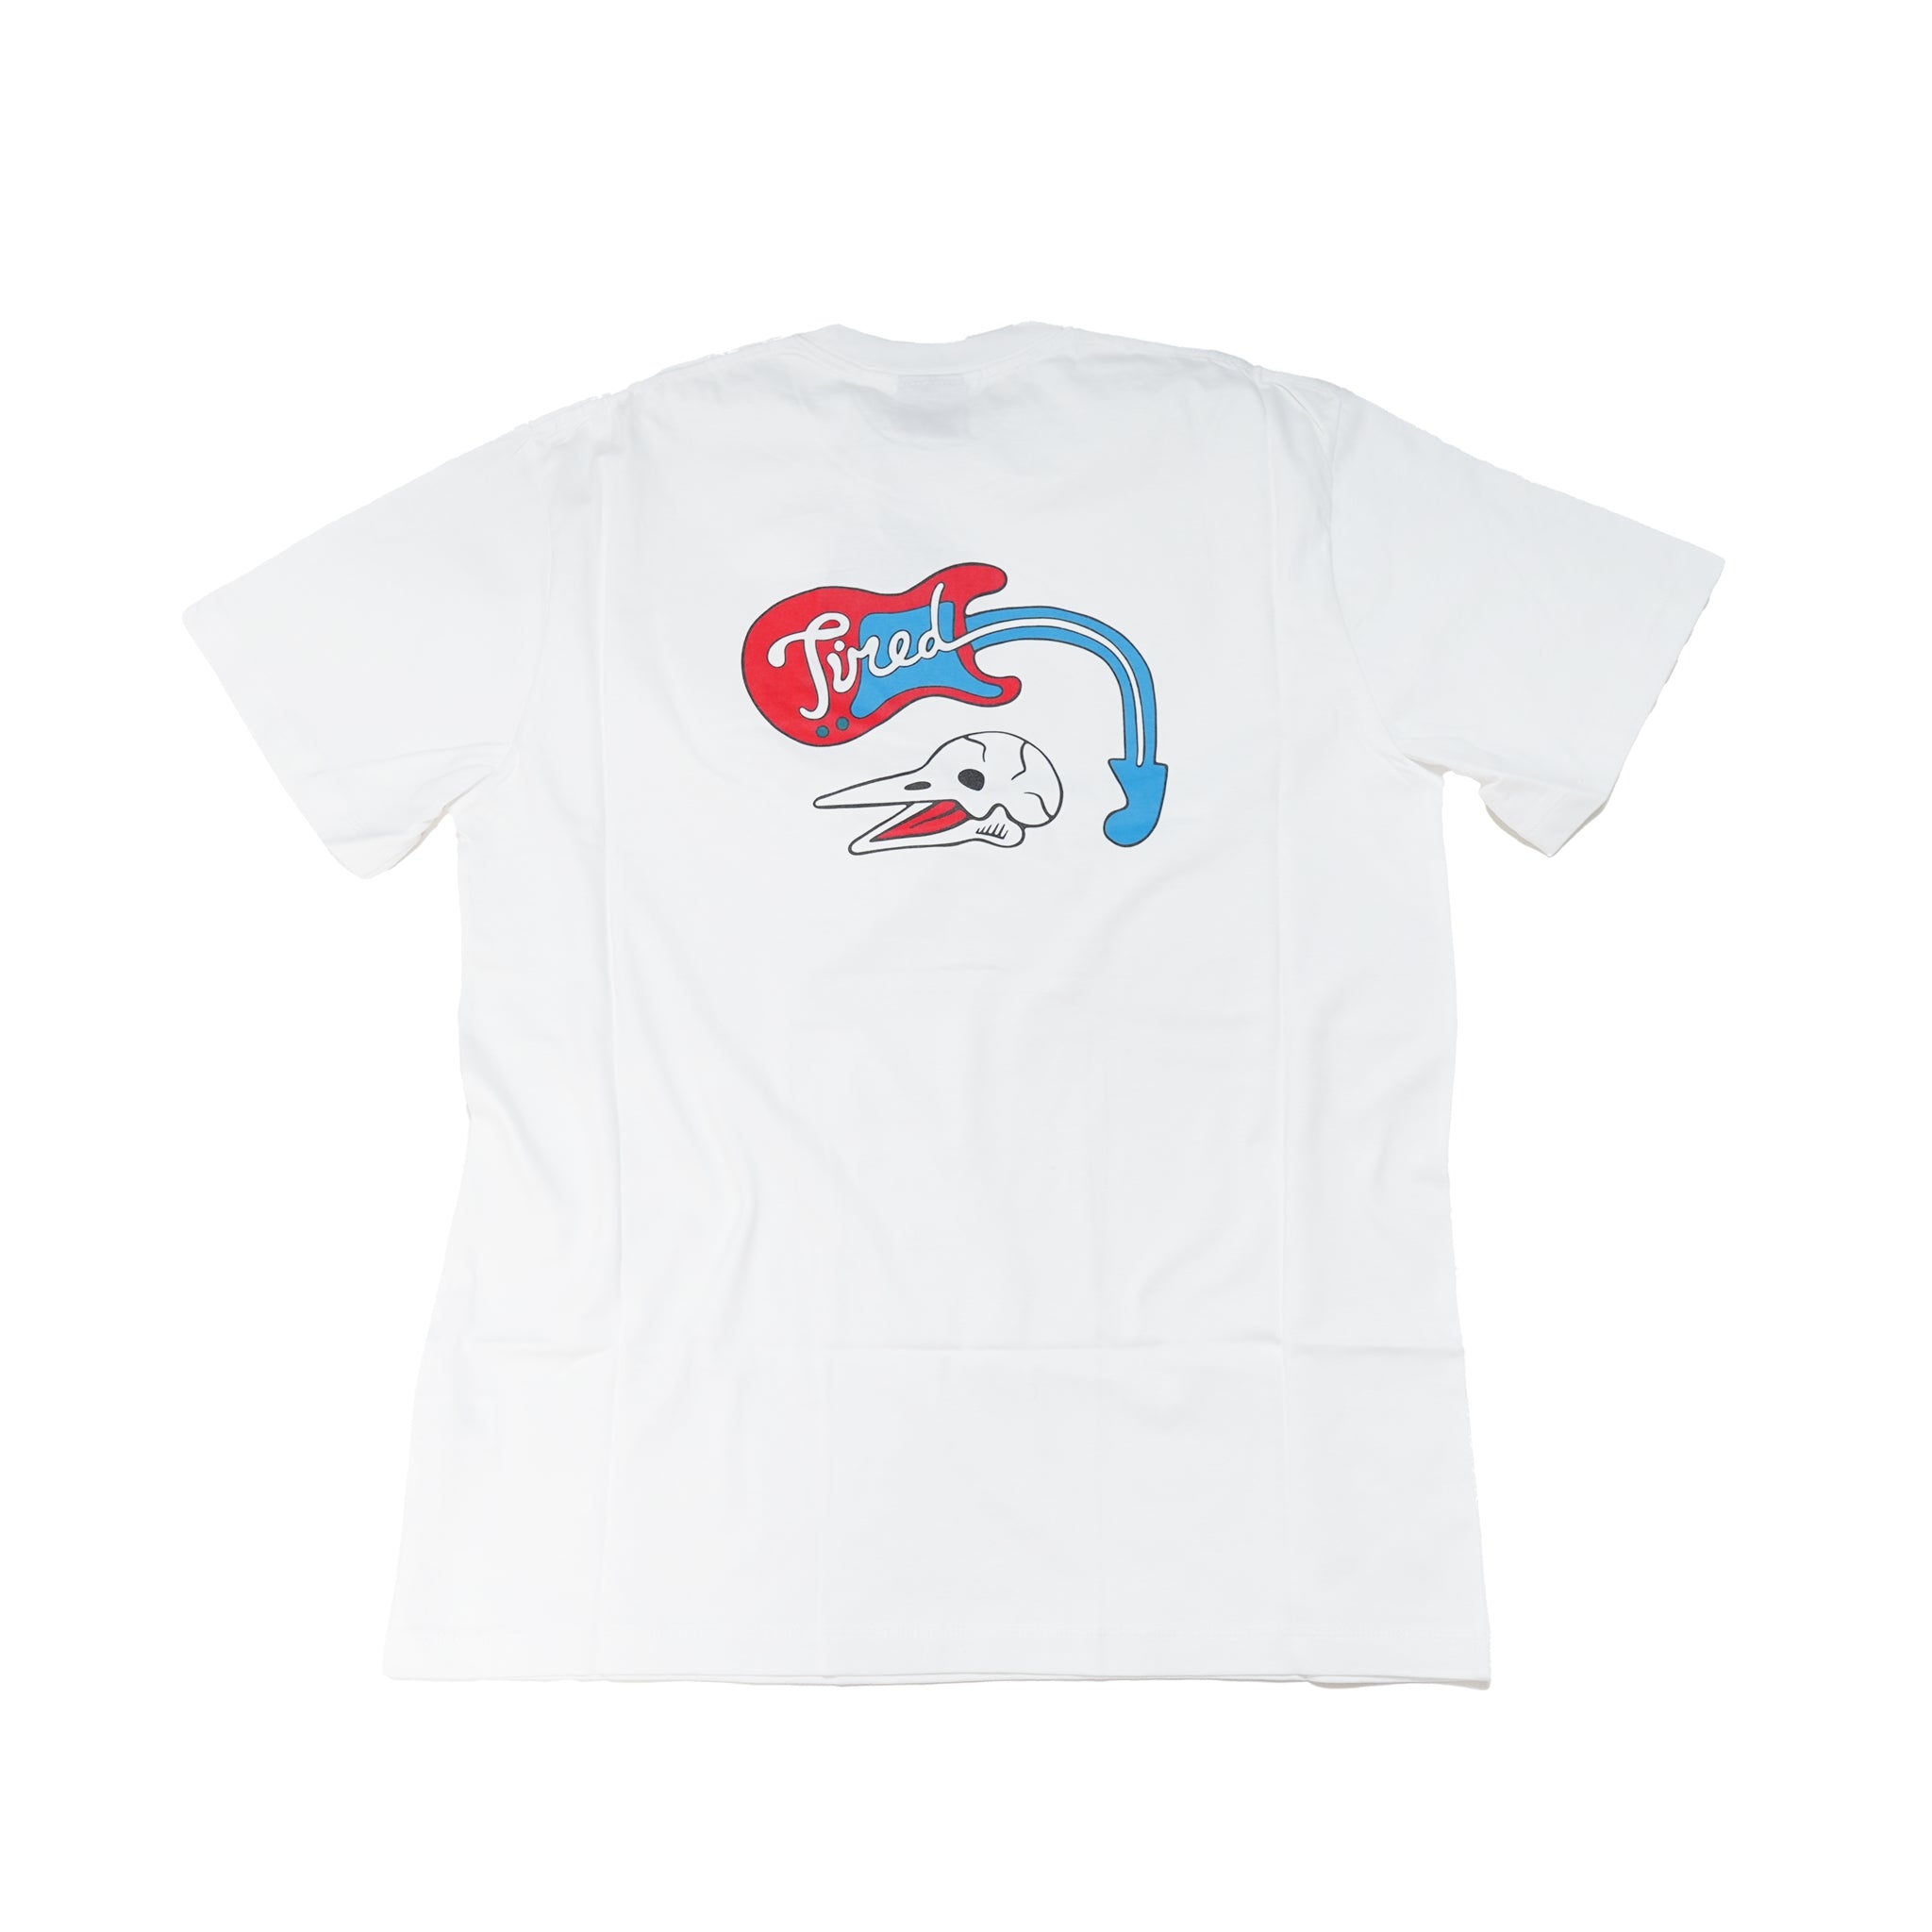 No:TS00254 | Name:MUSIC SS TEE (ORGANIC) | Color:White【TIRED_タイレッド】【ネコポス選択可能】